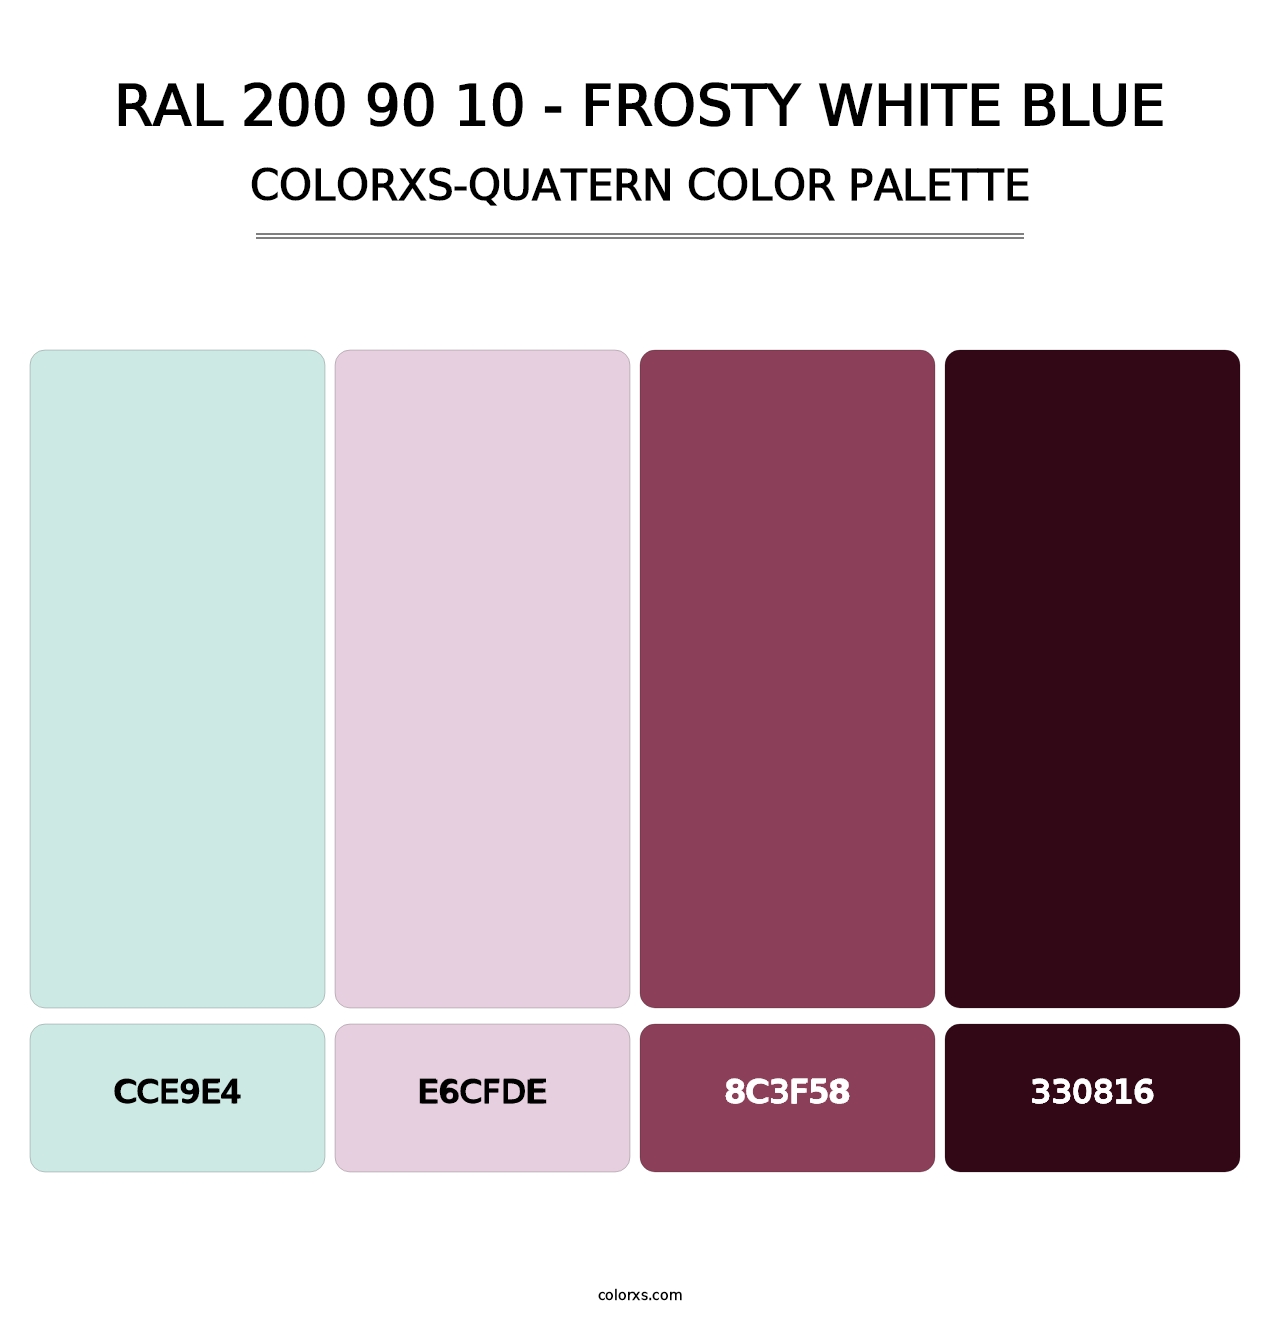 RAL 200 90 10 - Frosty White Blue - Colorxs Quatern Palette